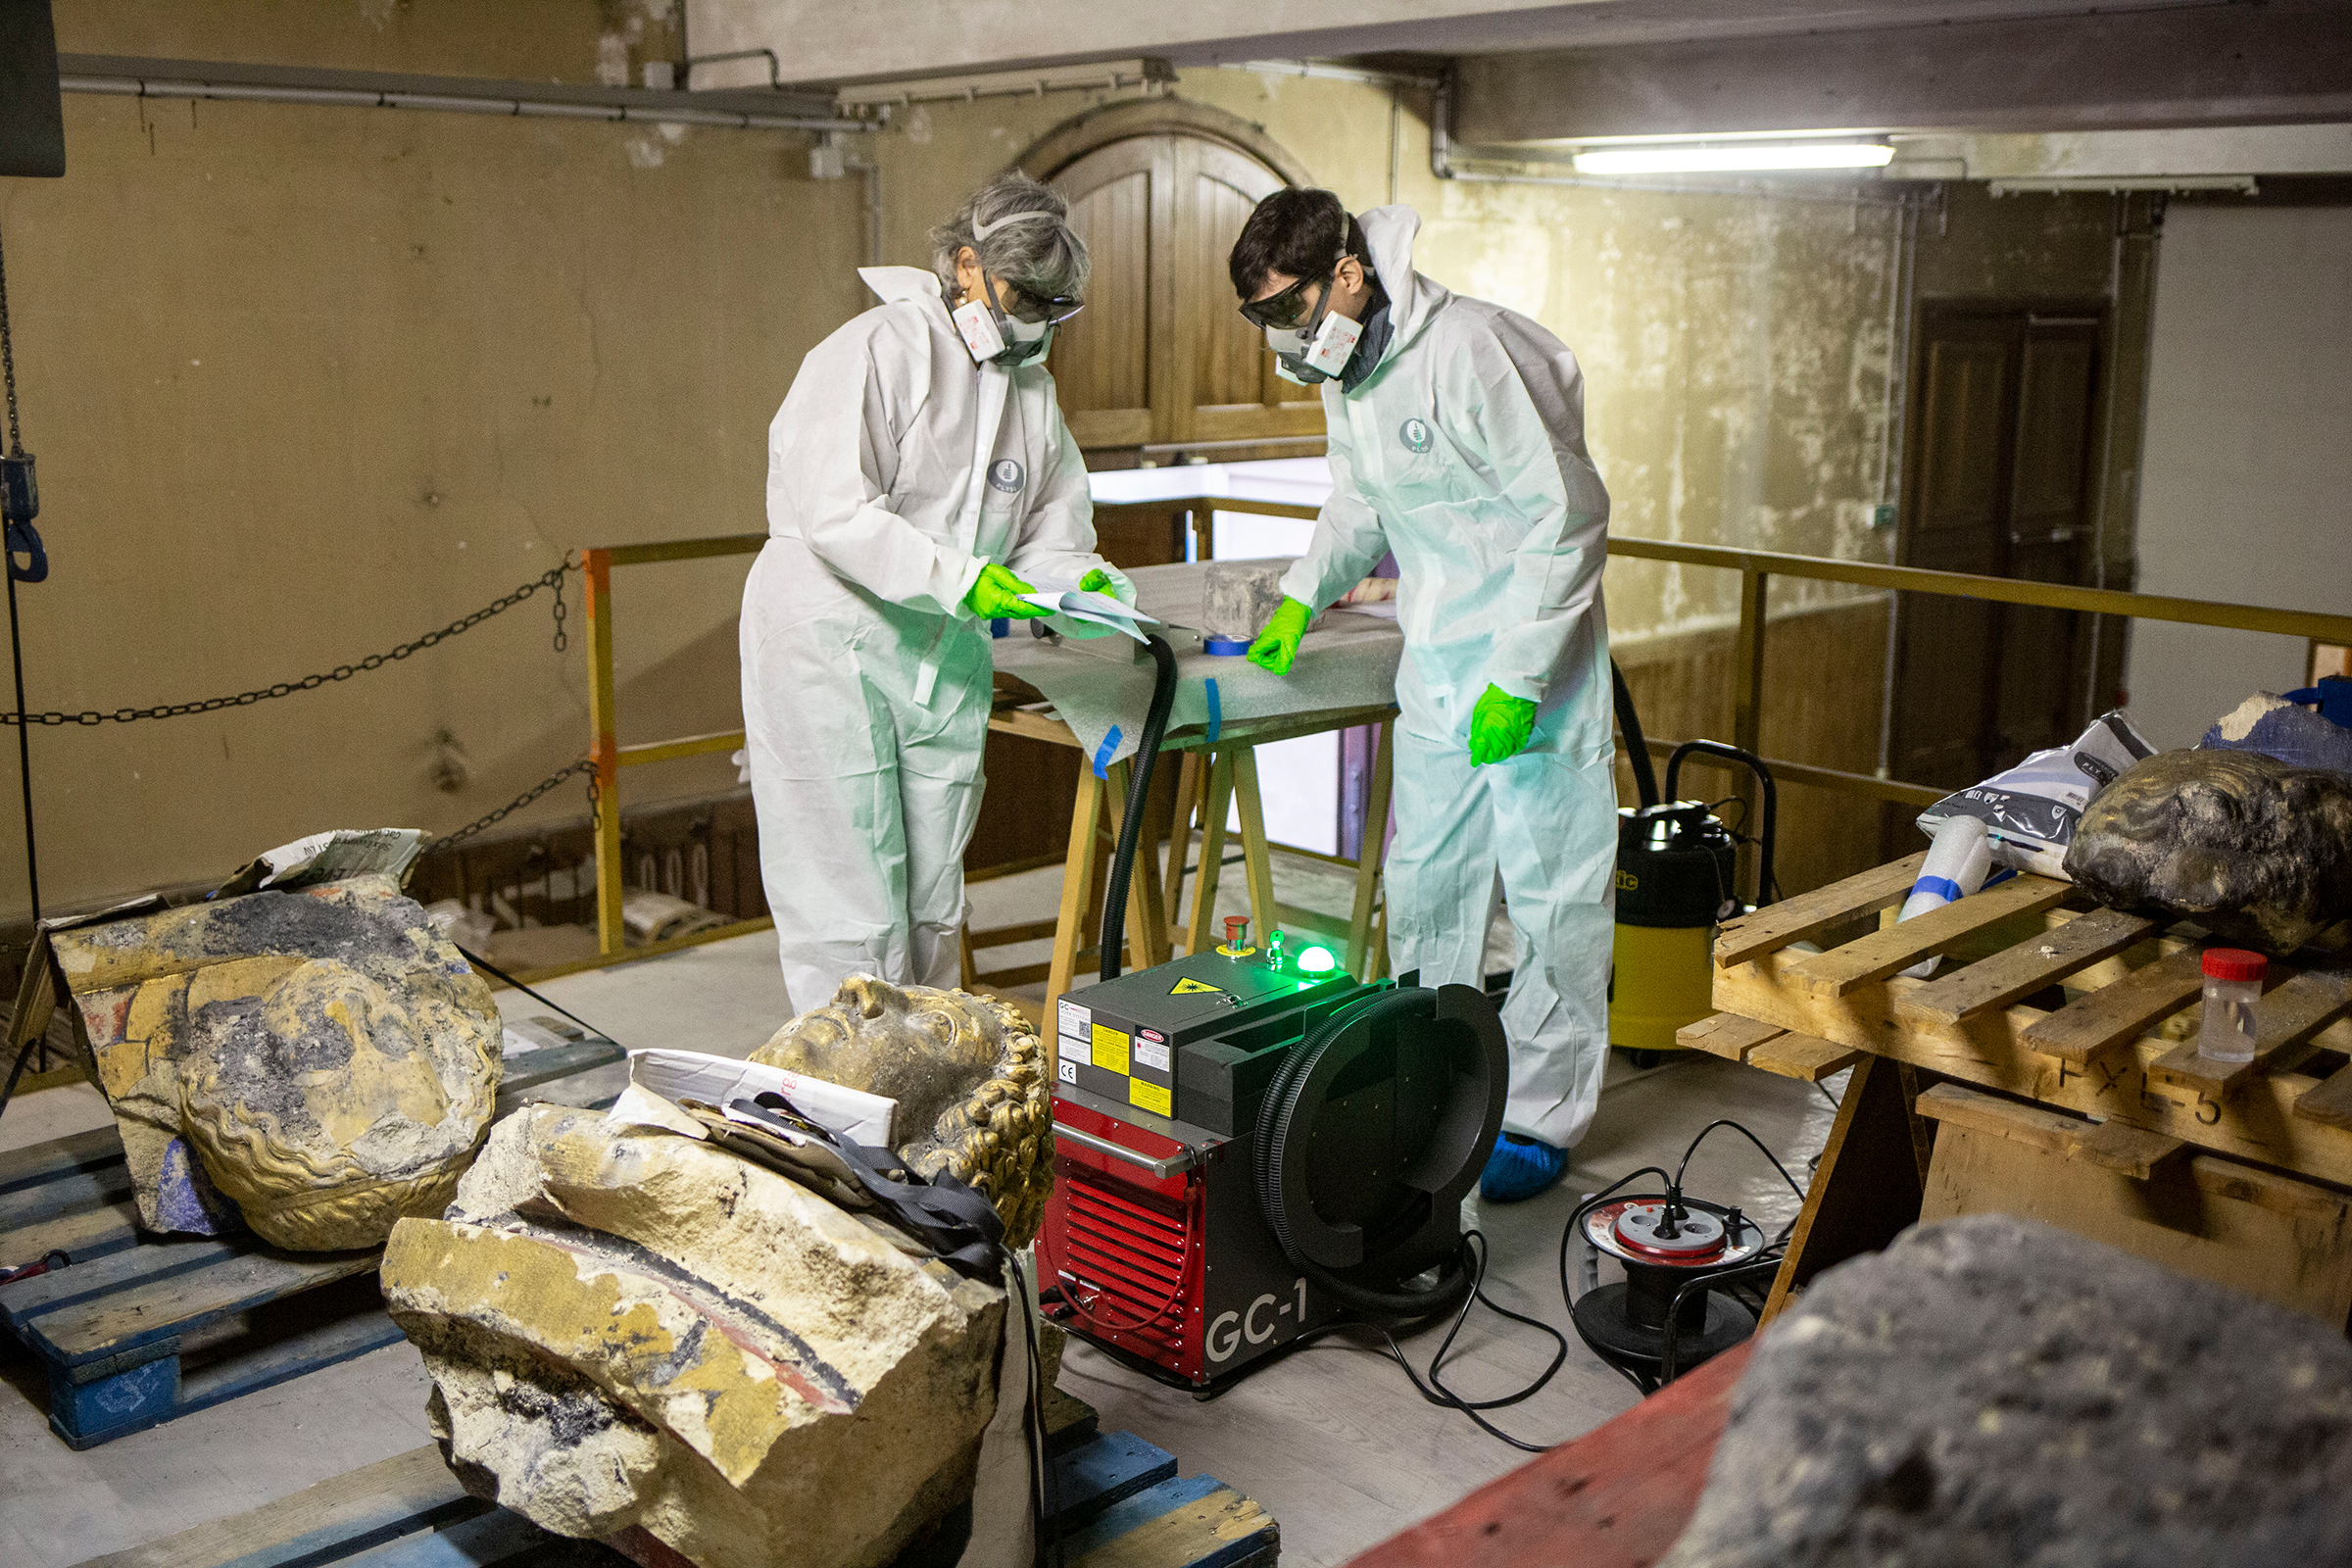 Véronique Vergès-Belnin and Jérémy Henin, surrounded by various busts and stones from the cathedral, at work in the Historical Monuments Research Laboratory in Champs-sur-Marne in October.